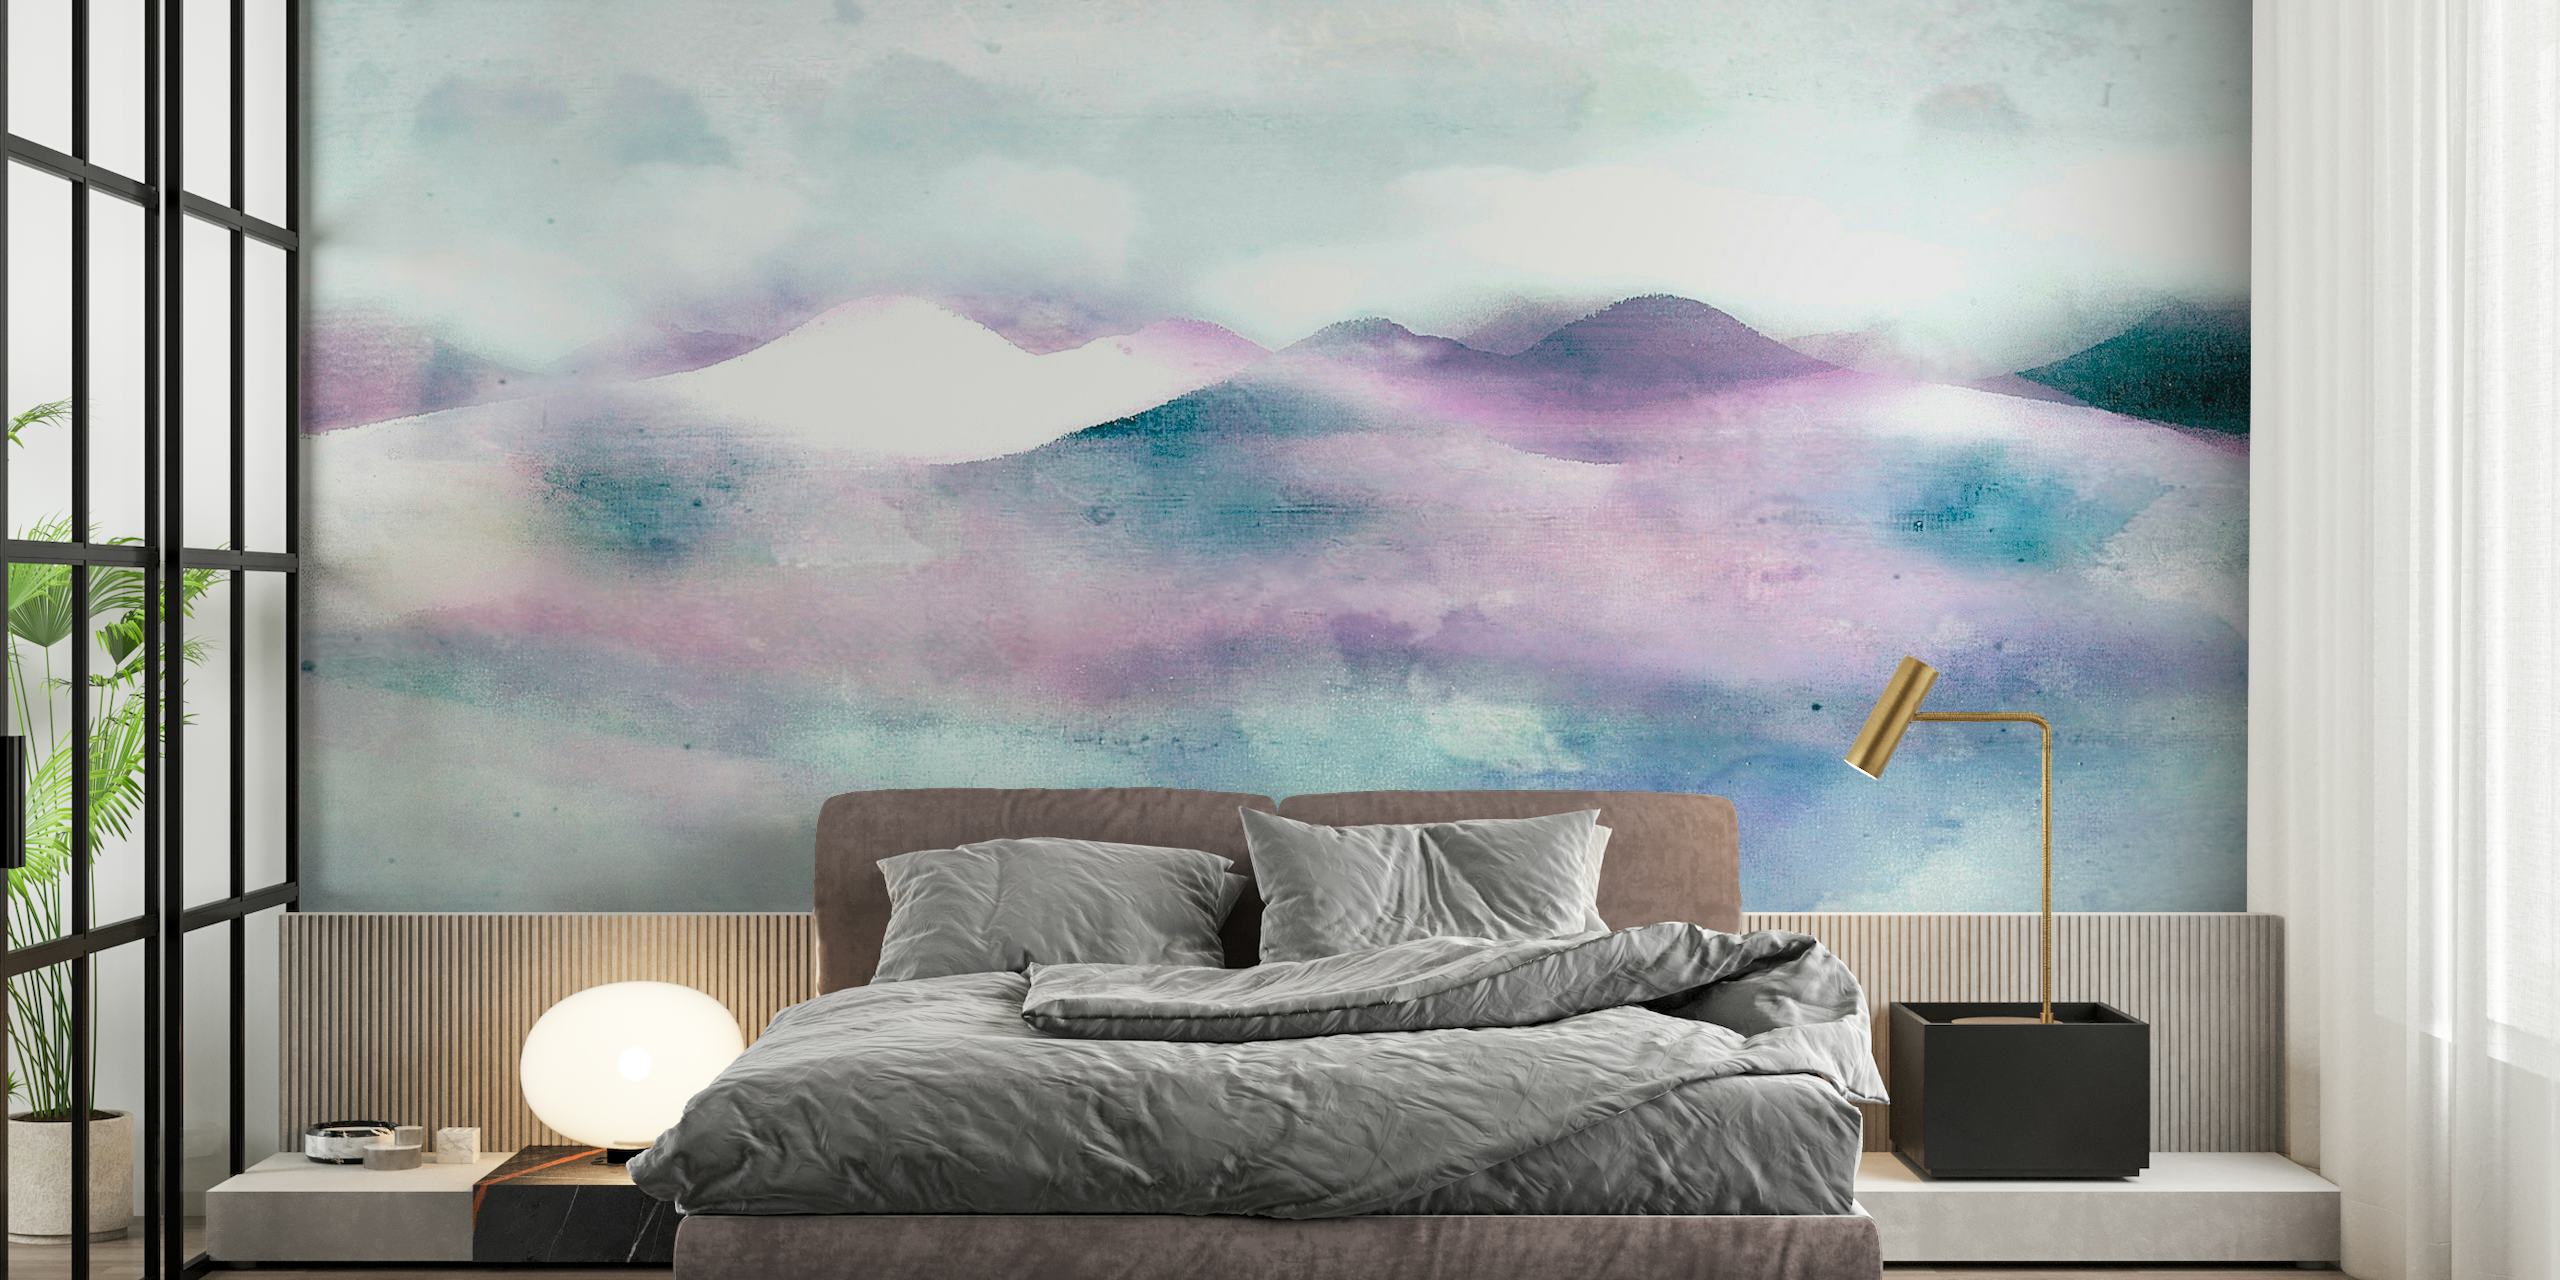 Japandi-style sunrise over mountains wall mural